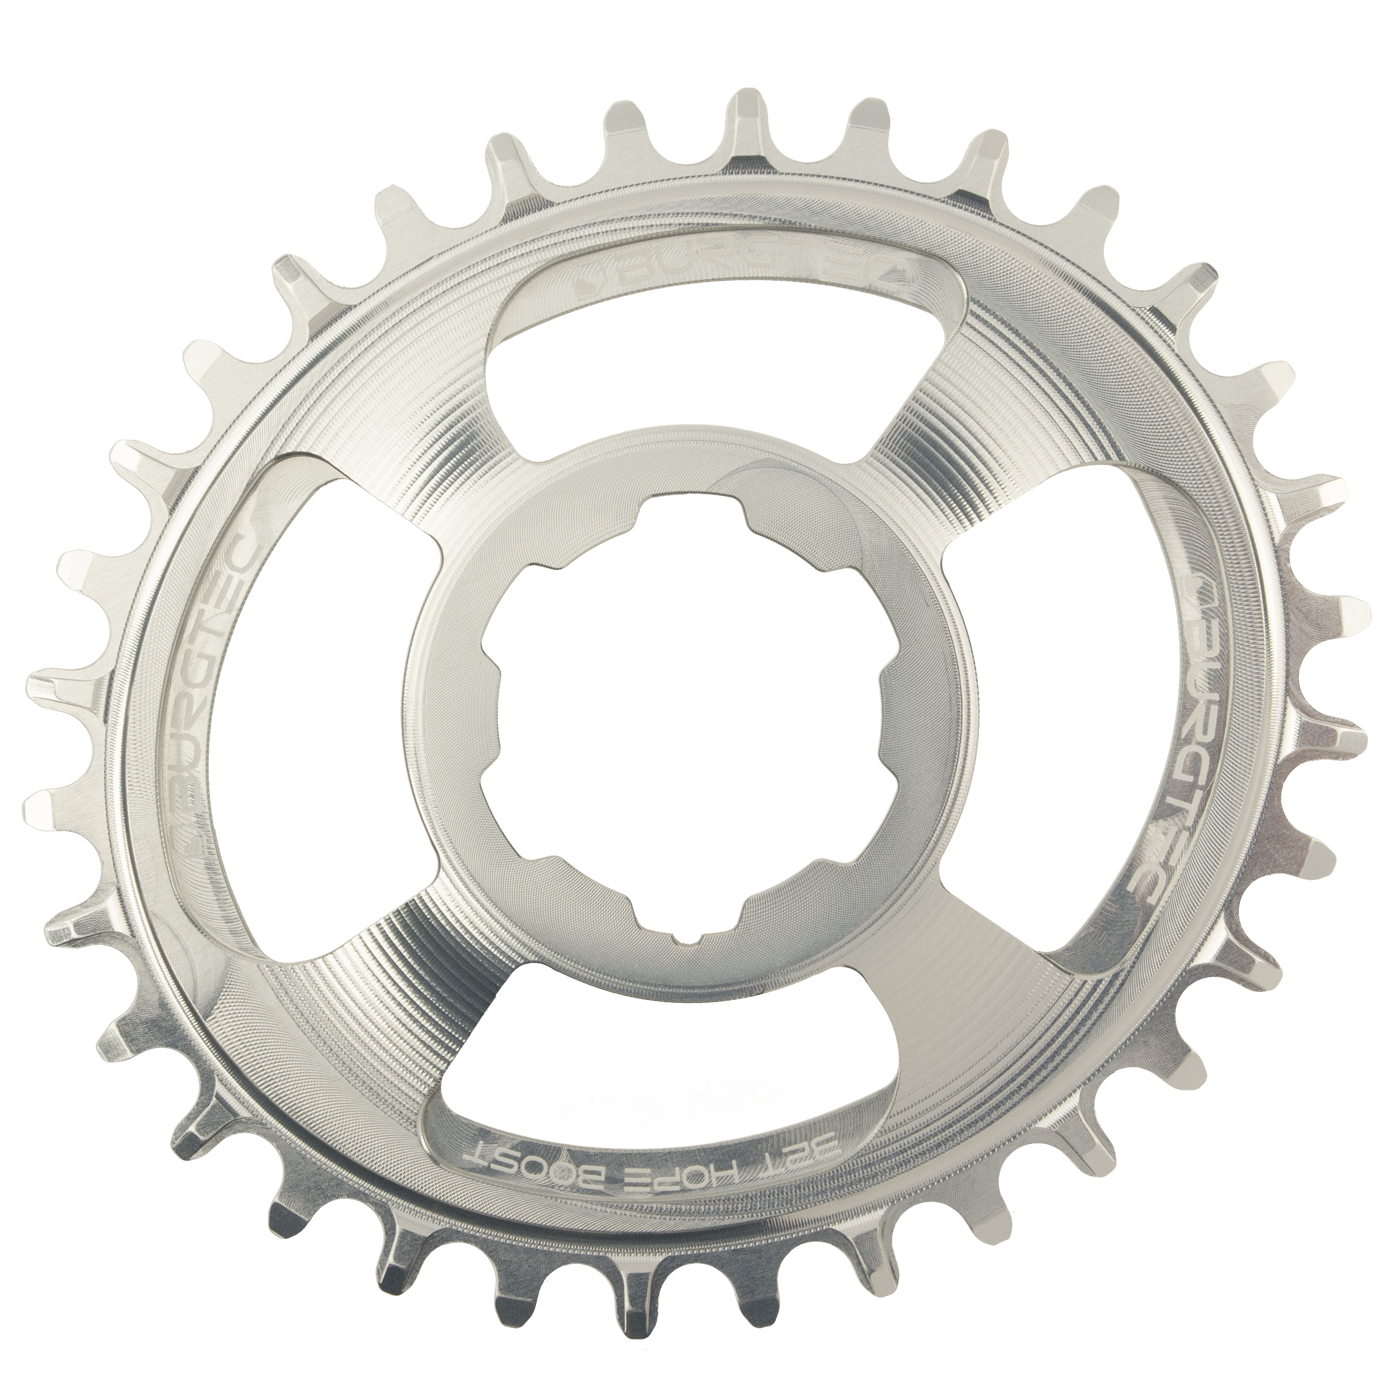 Burgtec Hope Oval Thick Thin Chainring